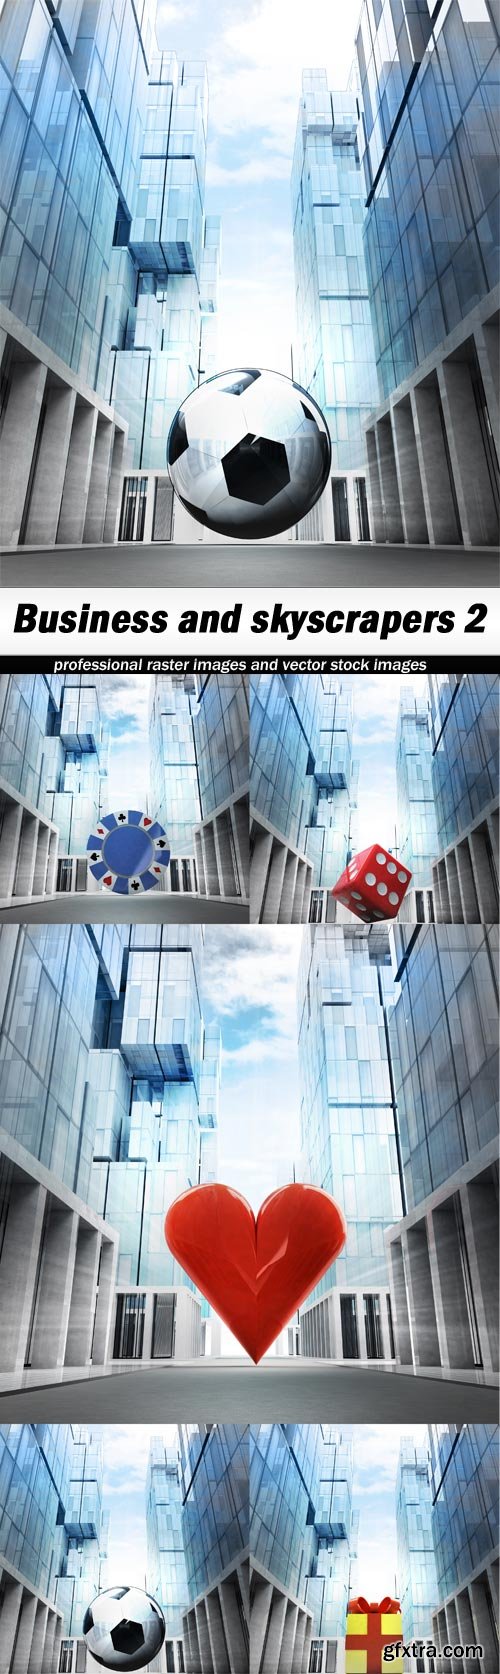 Business and skyscrapers 2-5xJPEGs